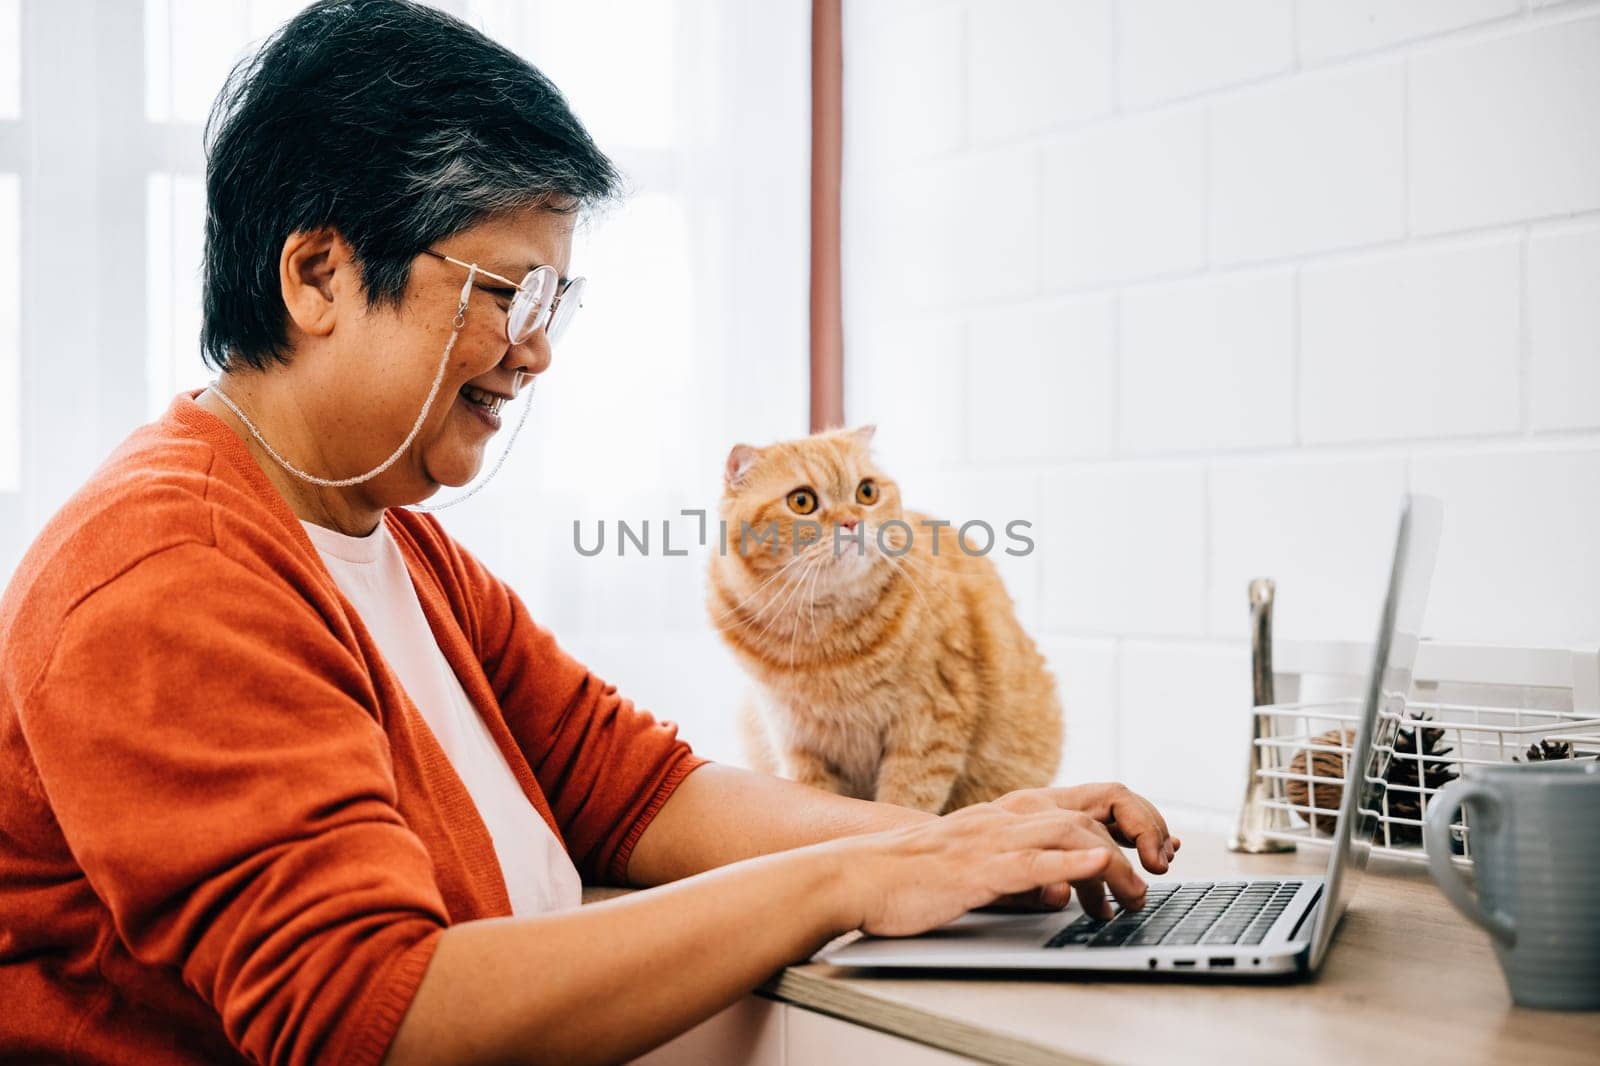 A woman works on her laptop at her desk in the morning, with her elderly cat looking on. Their friendship and togetherness create a heartwarming atmosphere of relaxation and productivity. pet love by Sorapop